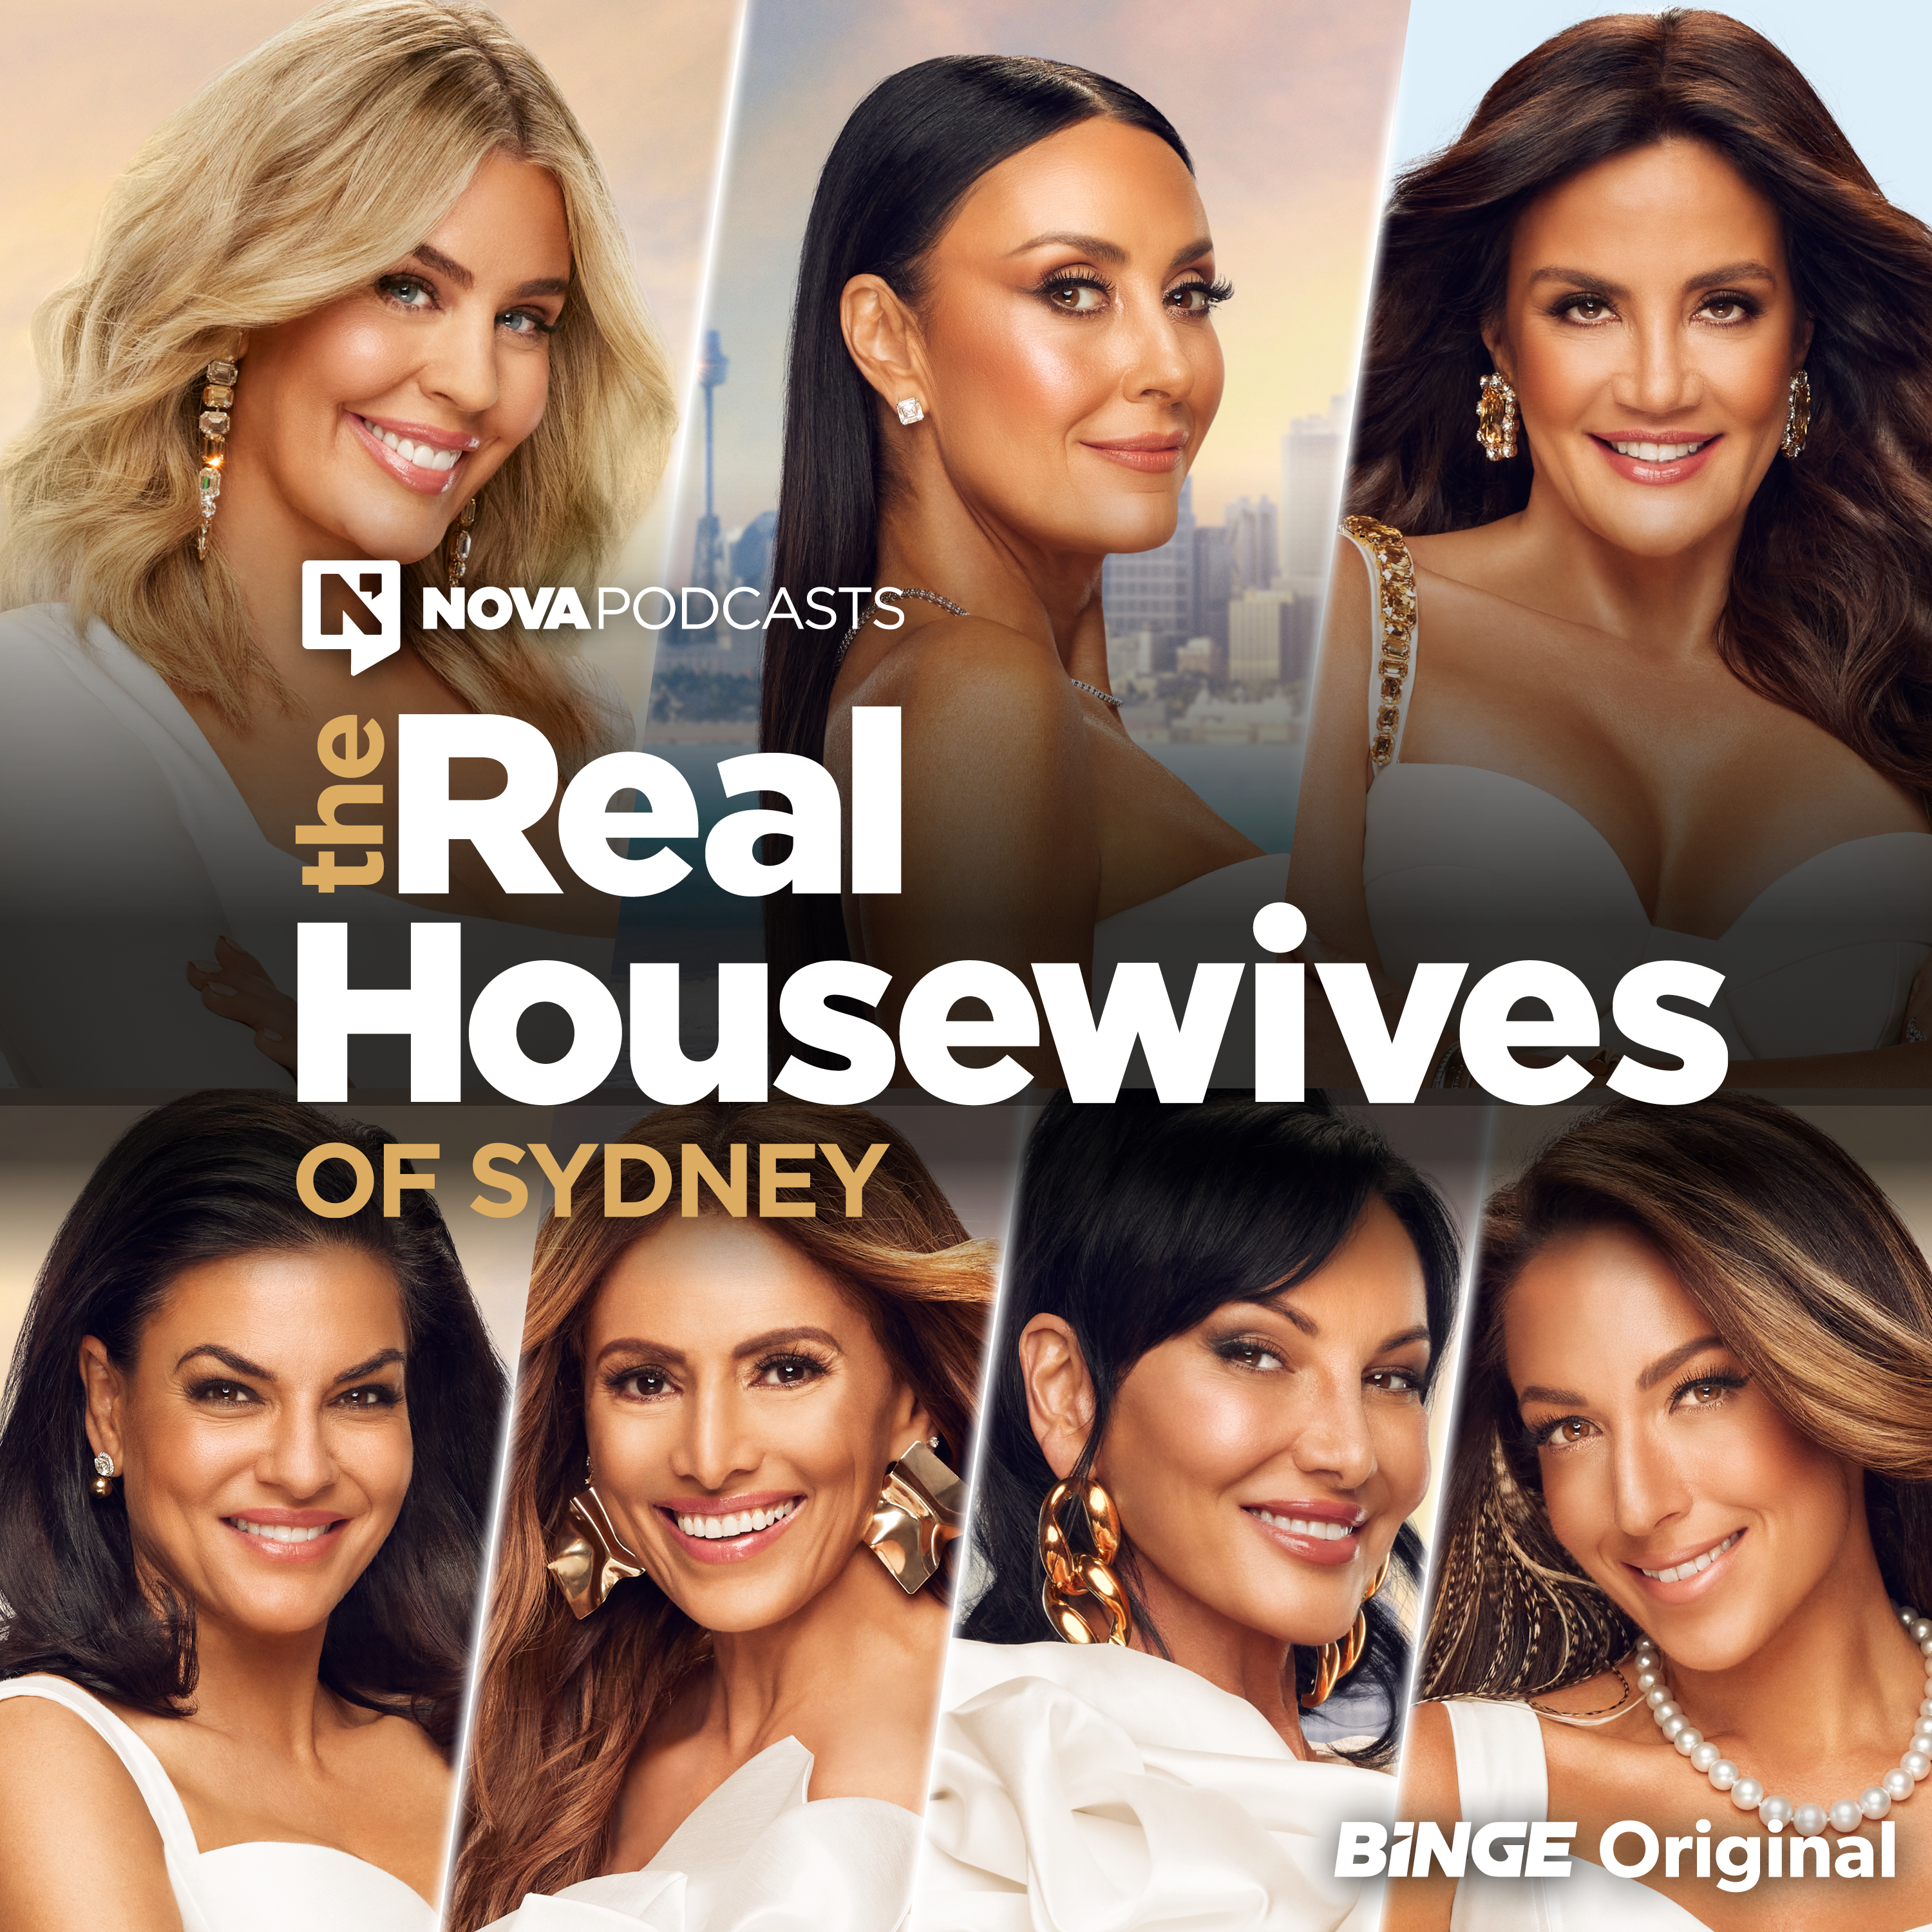 Coming Soon: The Real Housewives of Sydney